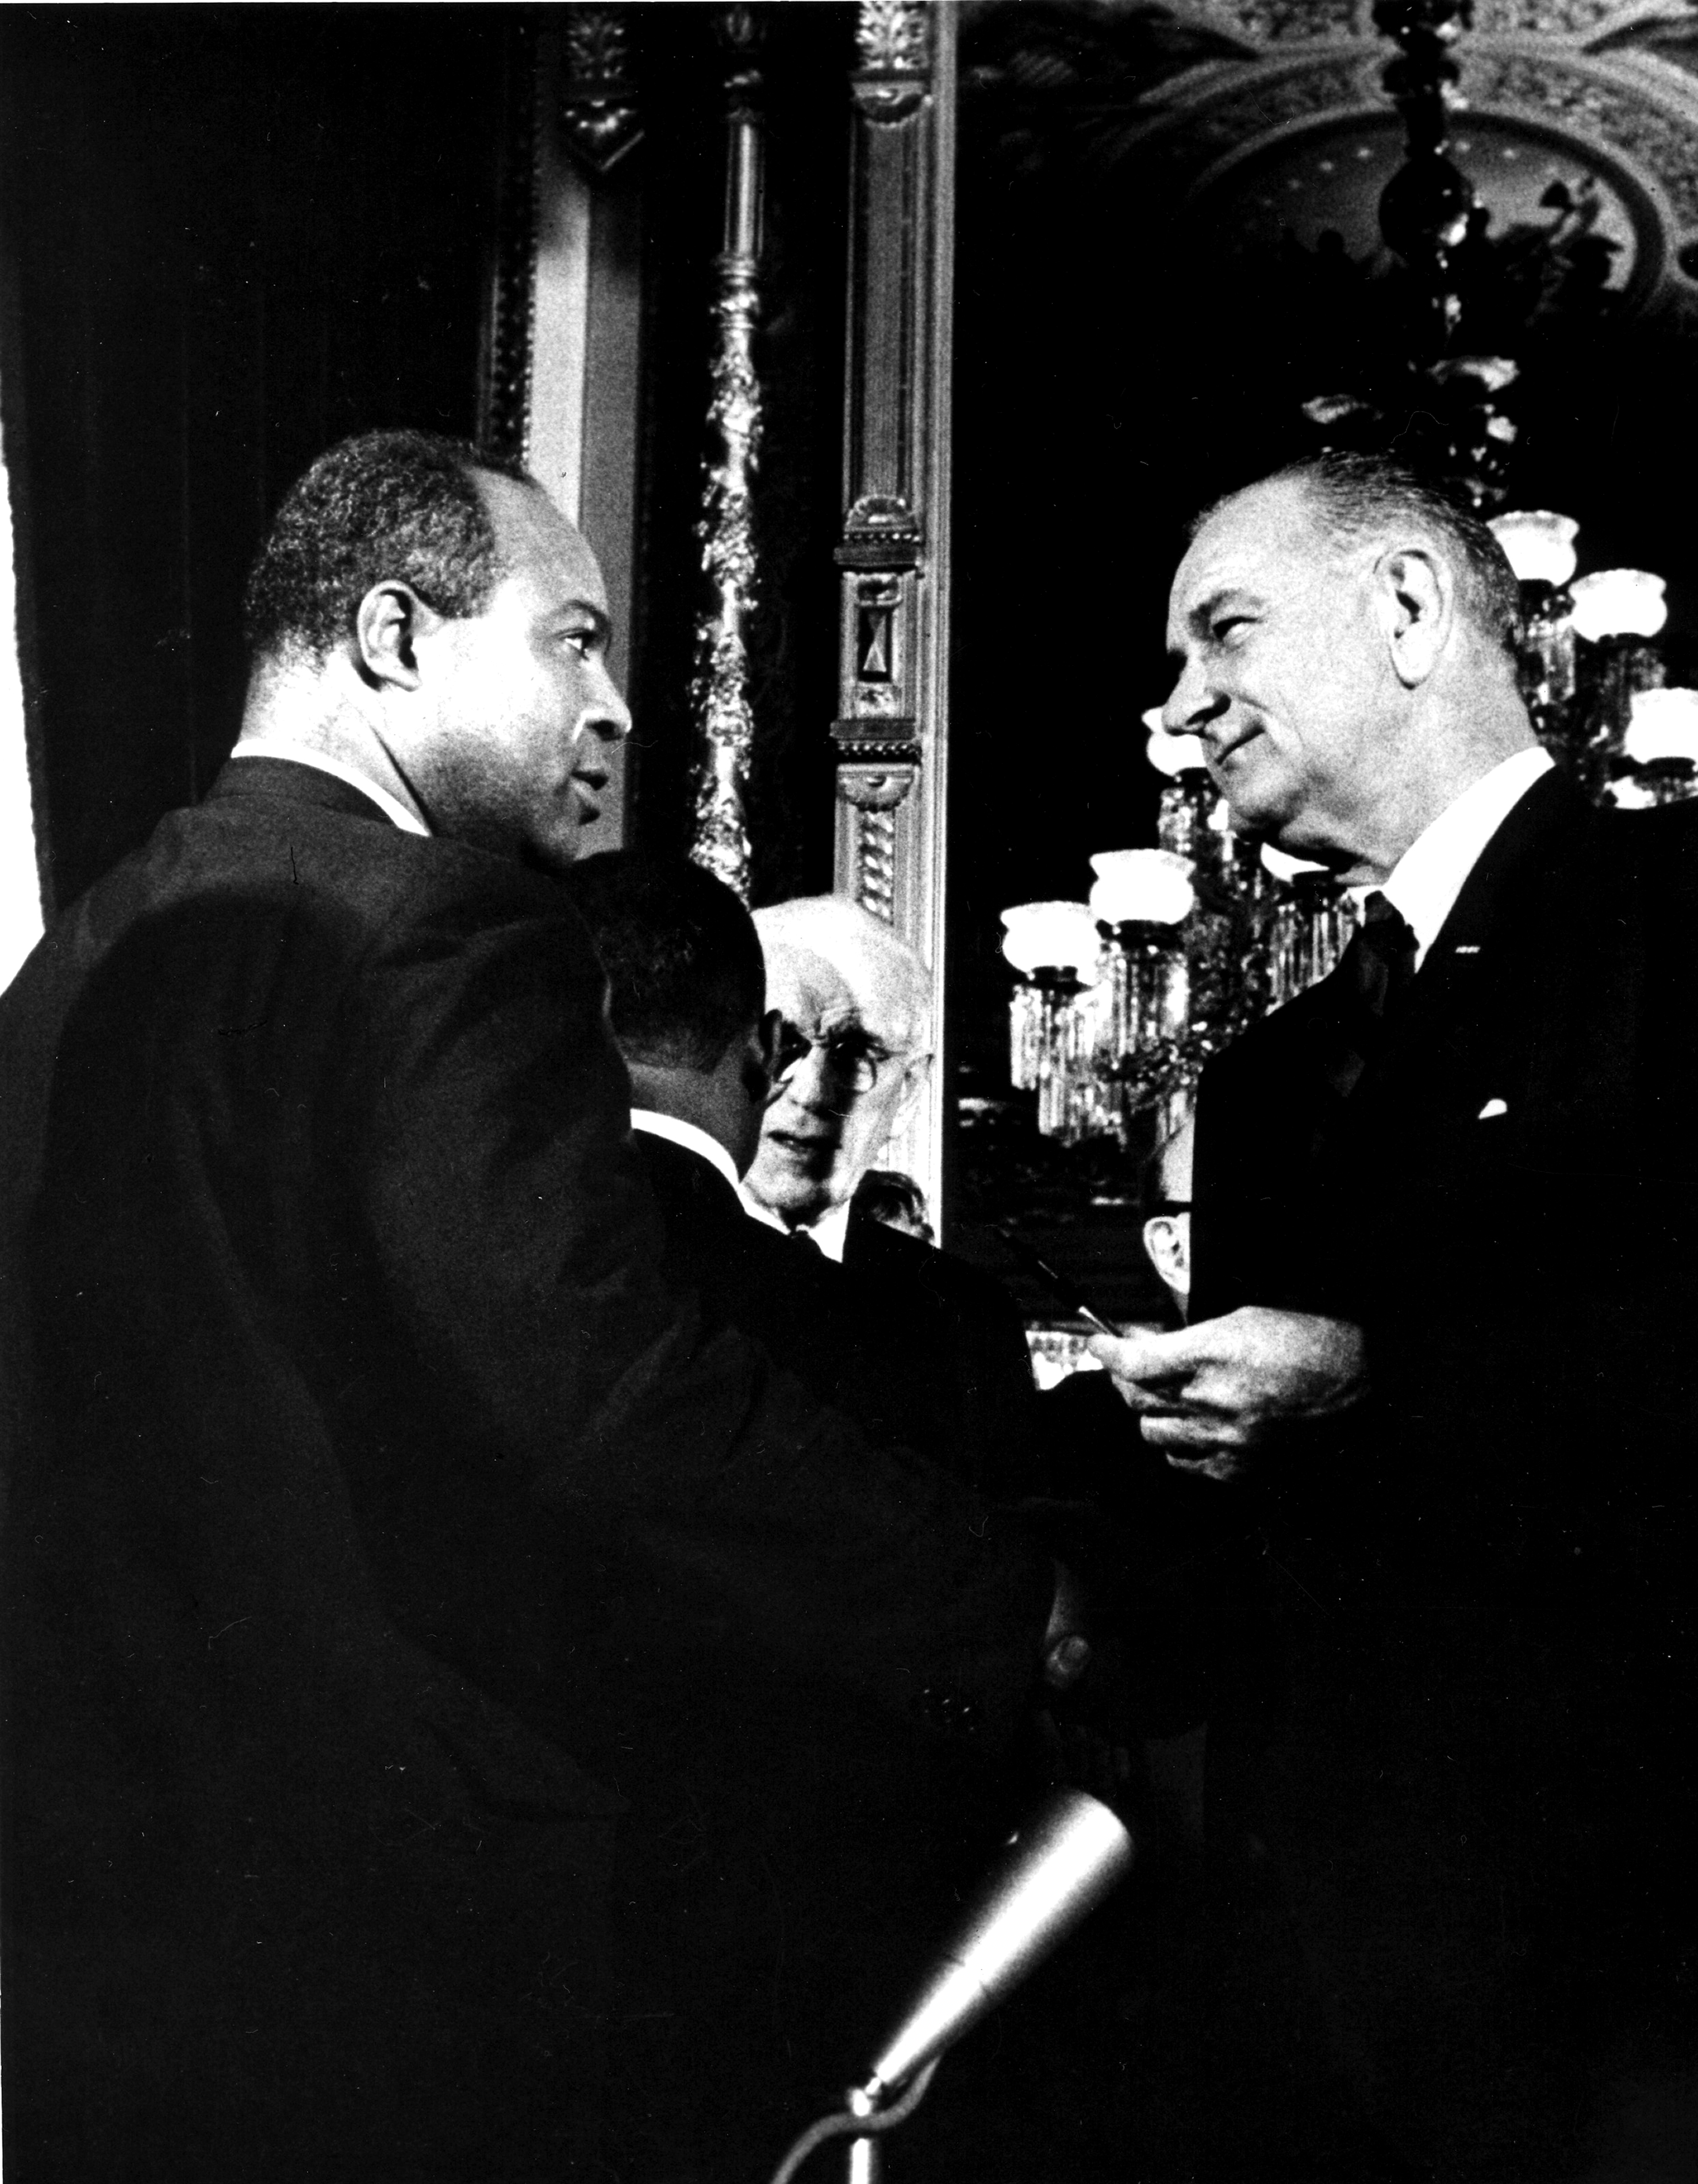 President Lyndon B. Johnson  presents one of the pens used to sign the Voting Rights Act of 1965 to the director of the Congress of Racial Equality (CORE) James L. Farmer Jr, Washington DC, August 6, 1965. (PhotoQuest—Getty Images)